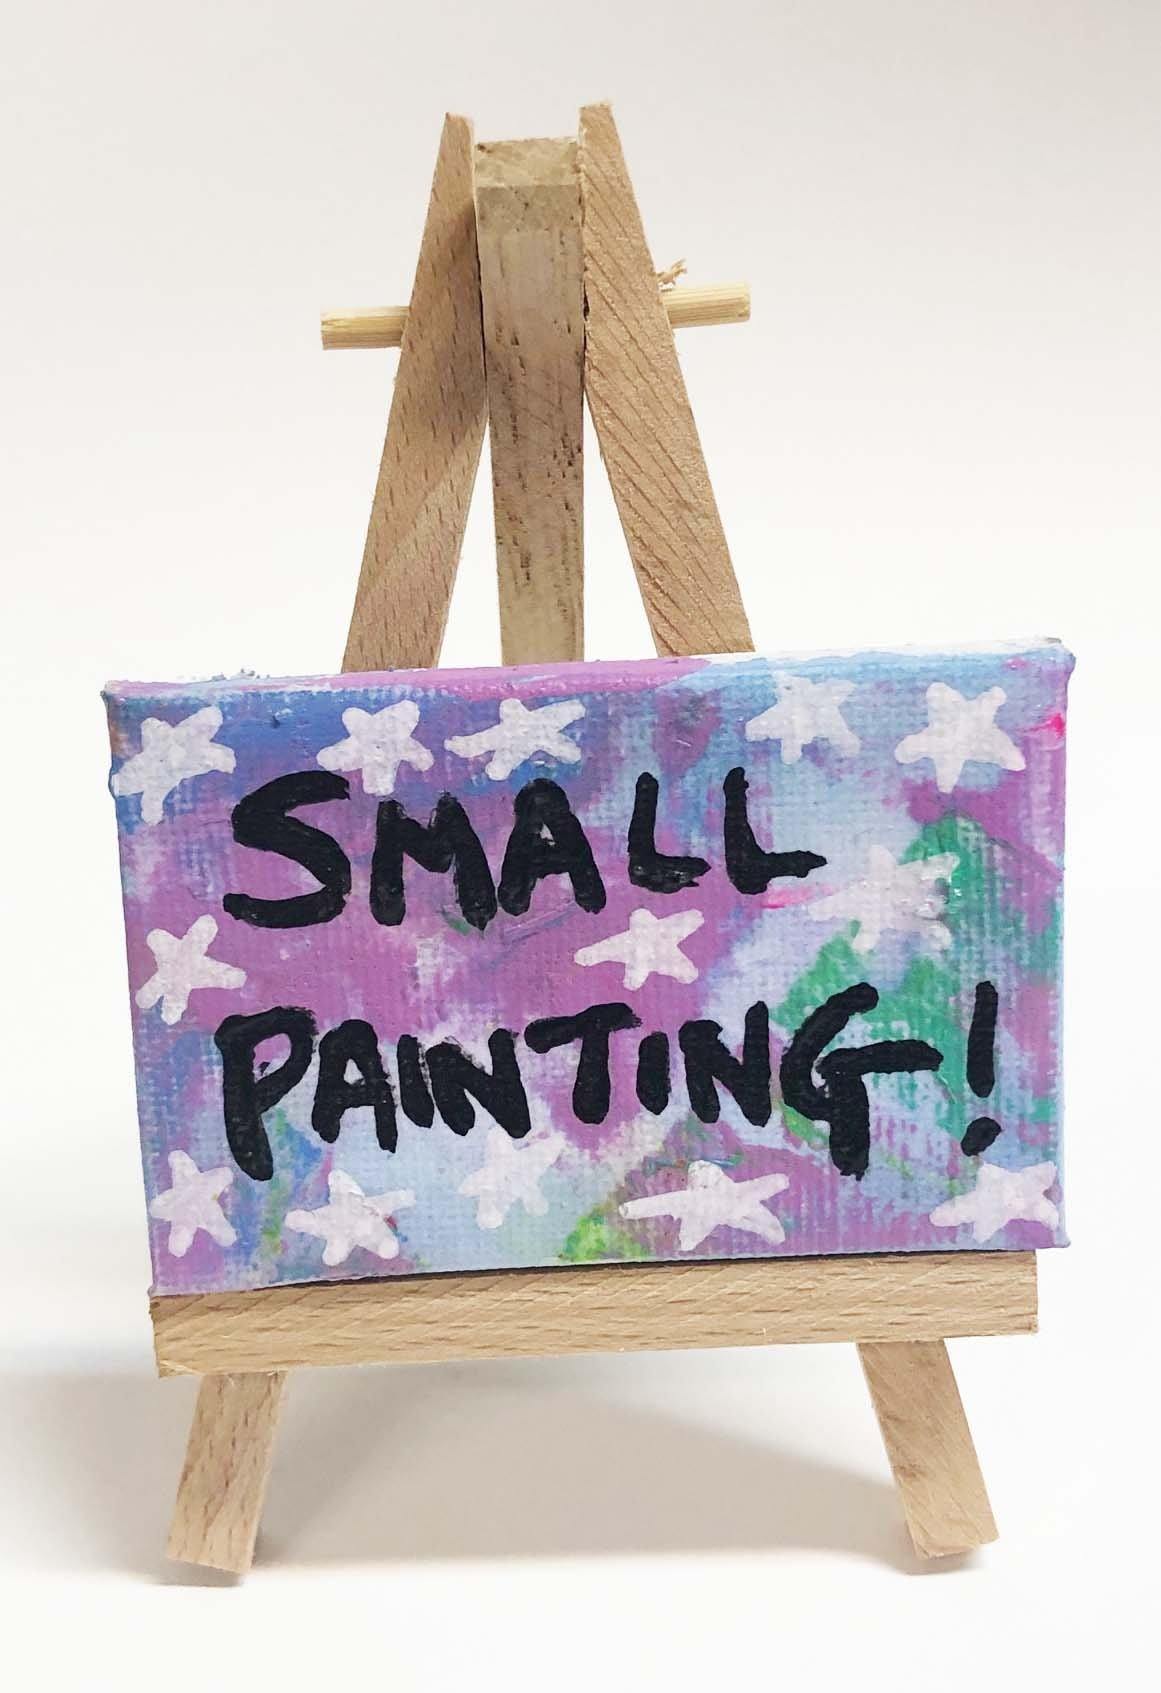 Small Painting by Barrie J Davies 2019, mixed media on canvas, Unframed on mini easel, 7.5cm x 5cm.